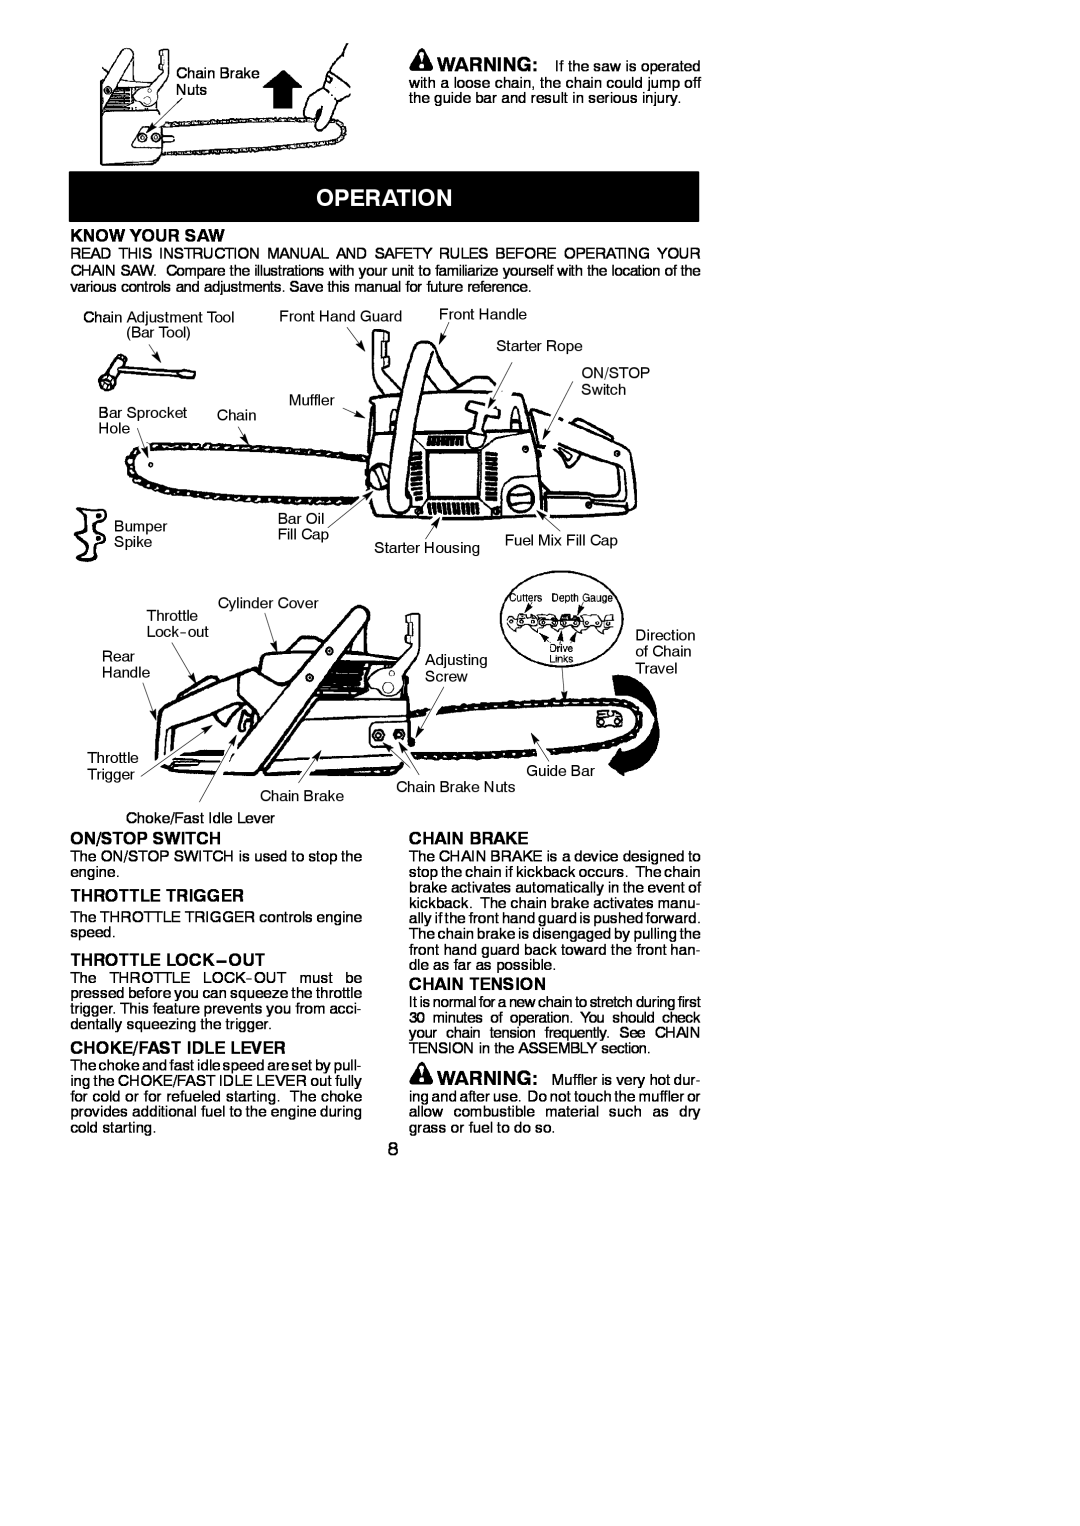 Poulan 545047502 Operation, Know Your Saw, On/Stop Switch, Throttle Trigger, Throttle Lock---Out, Choke/Fast Idle Lever 